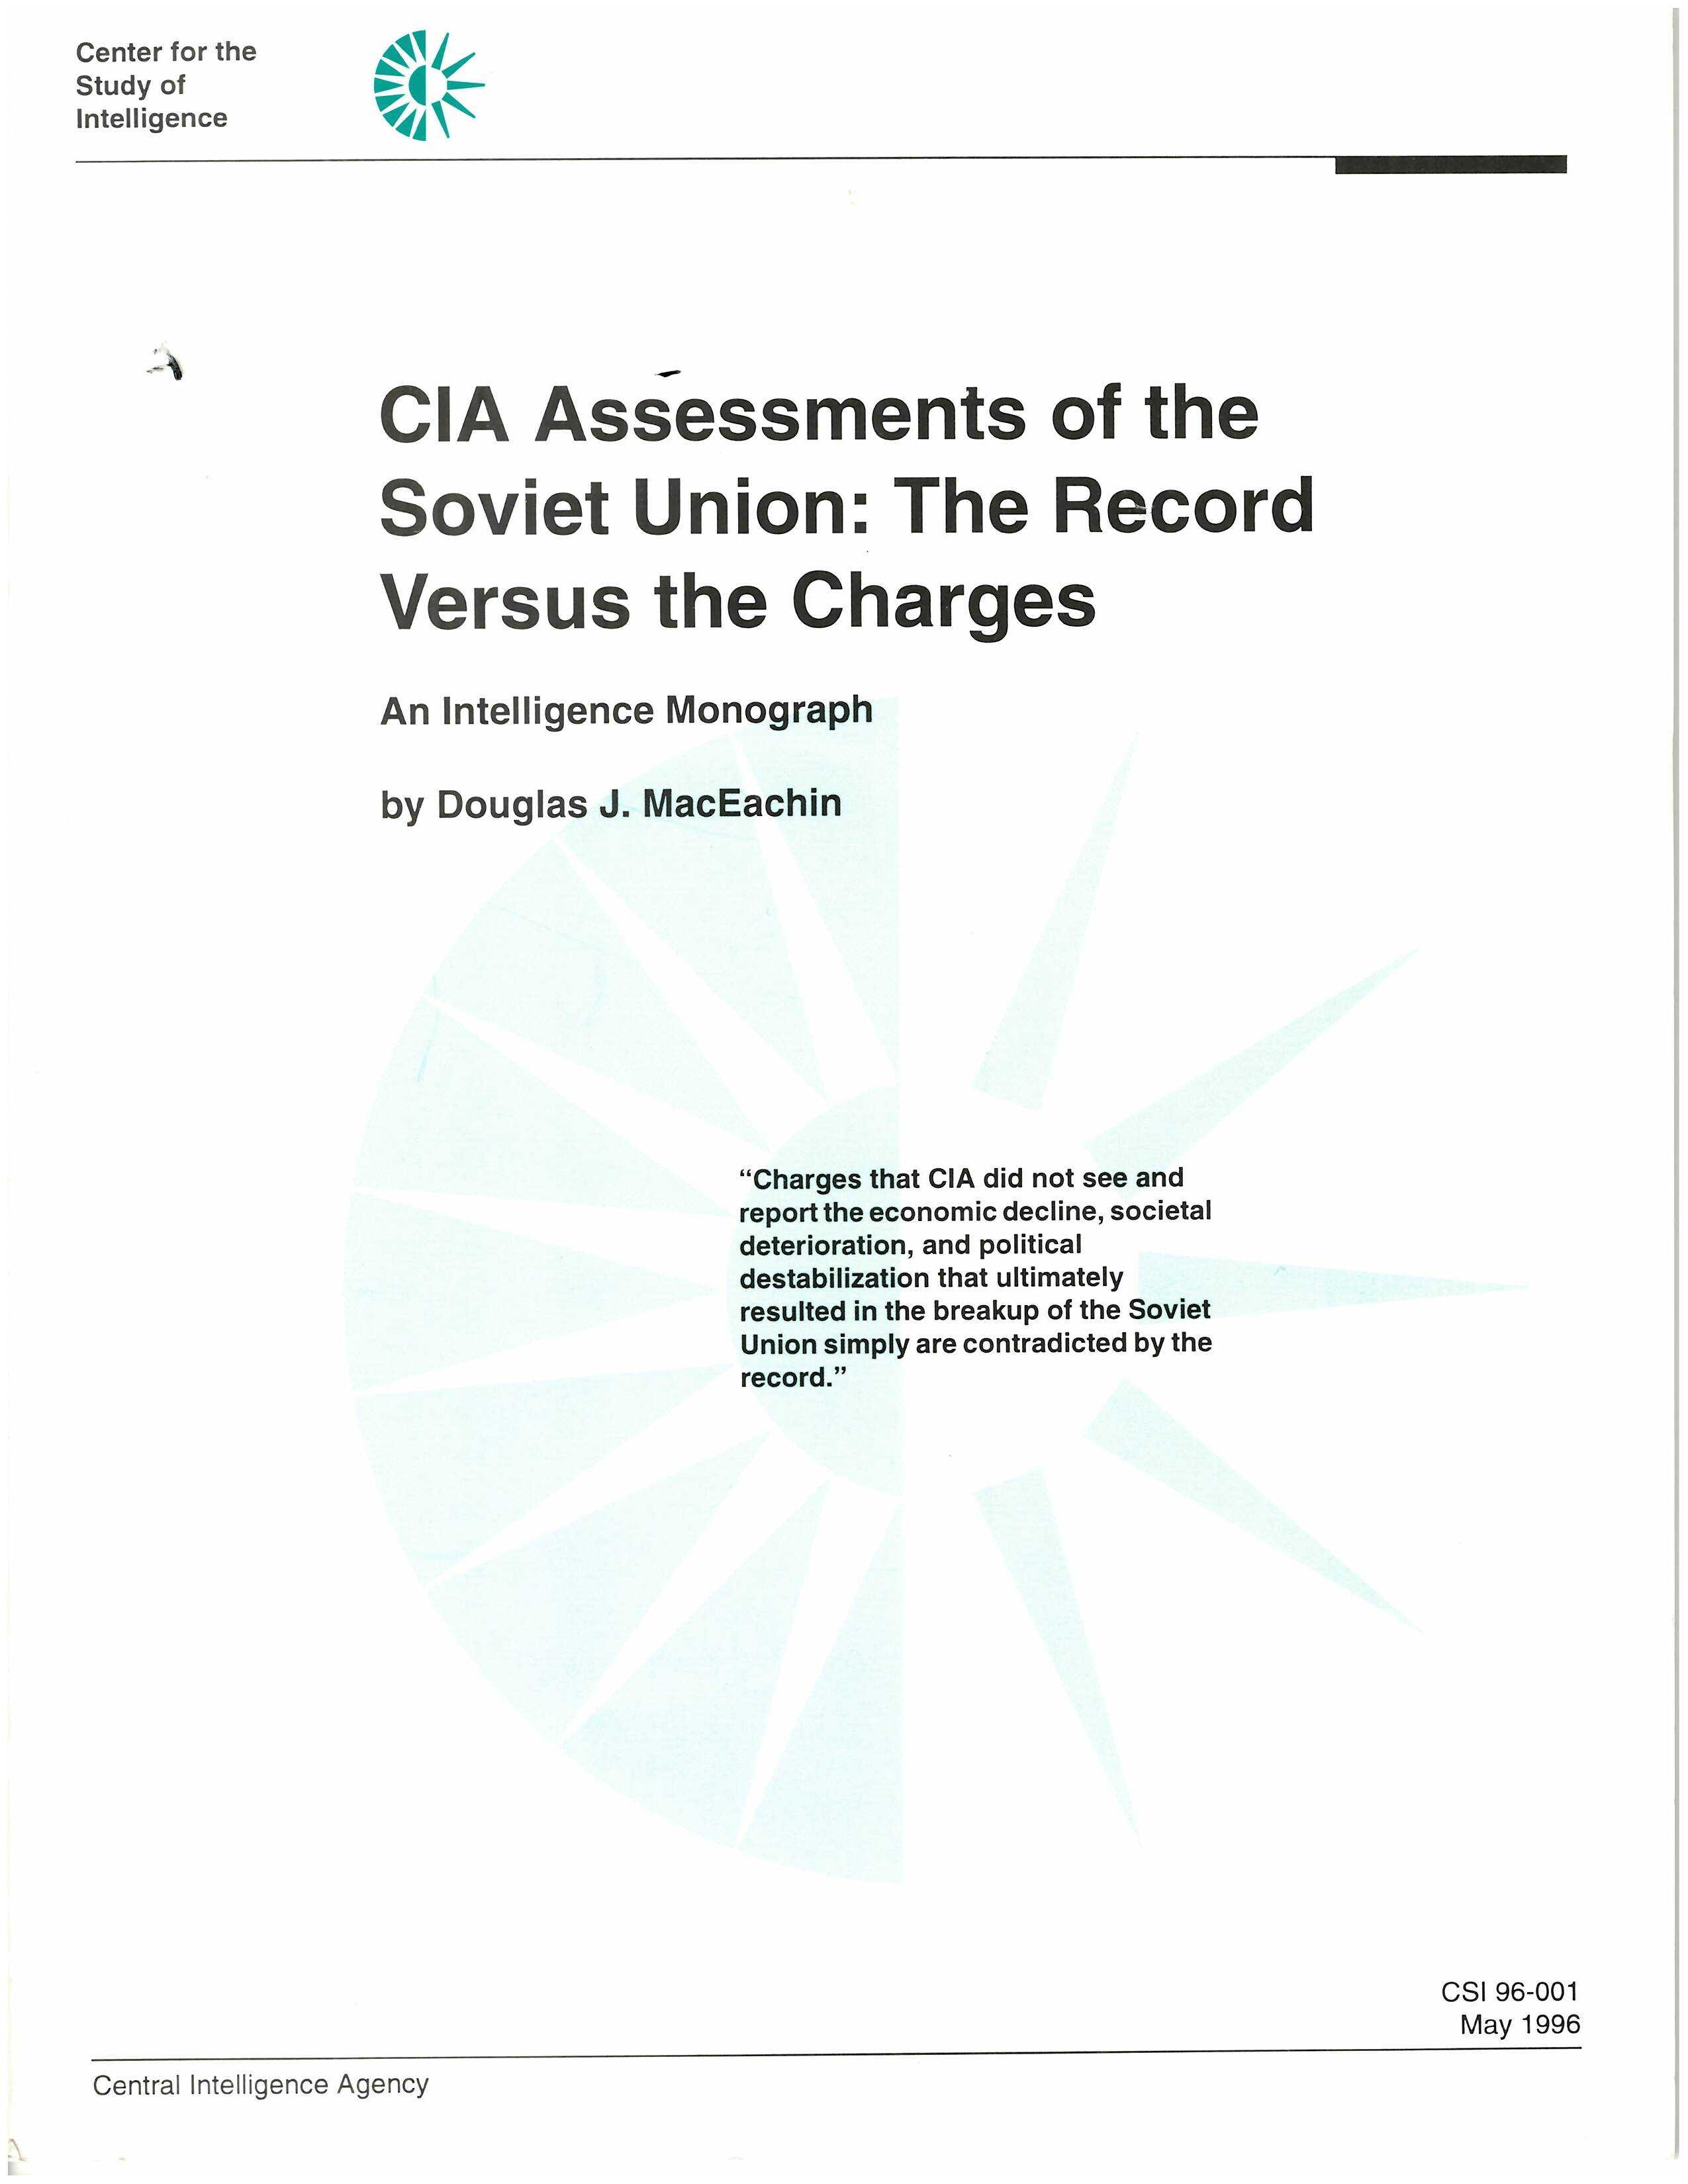 Plain cover showing the title of CIA Assessments of the Soviet Union: The Record versus the Charges by Douglas MacEachin